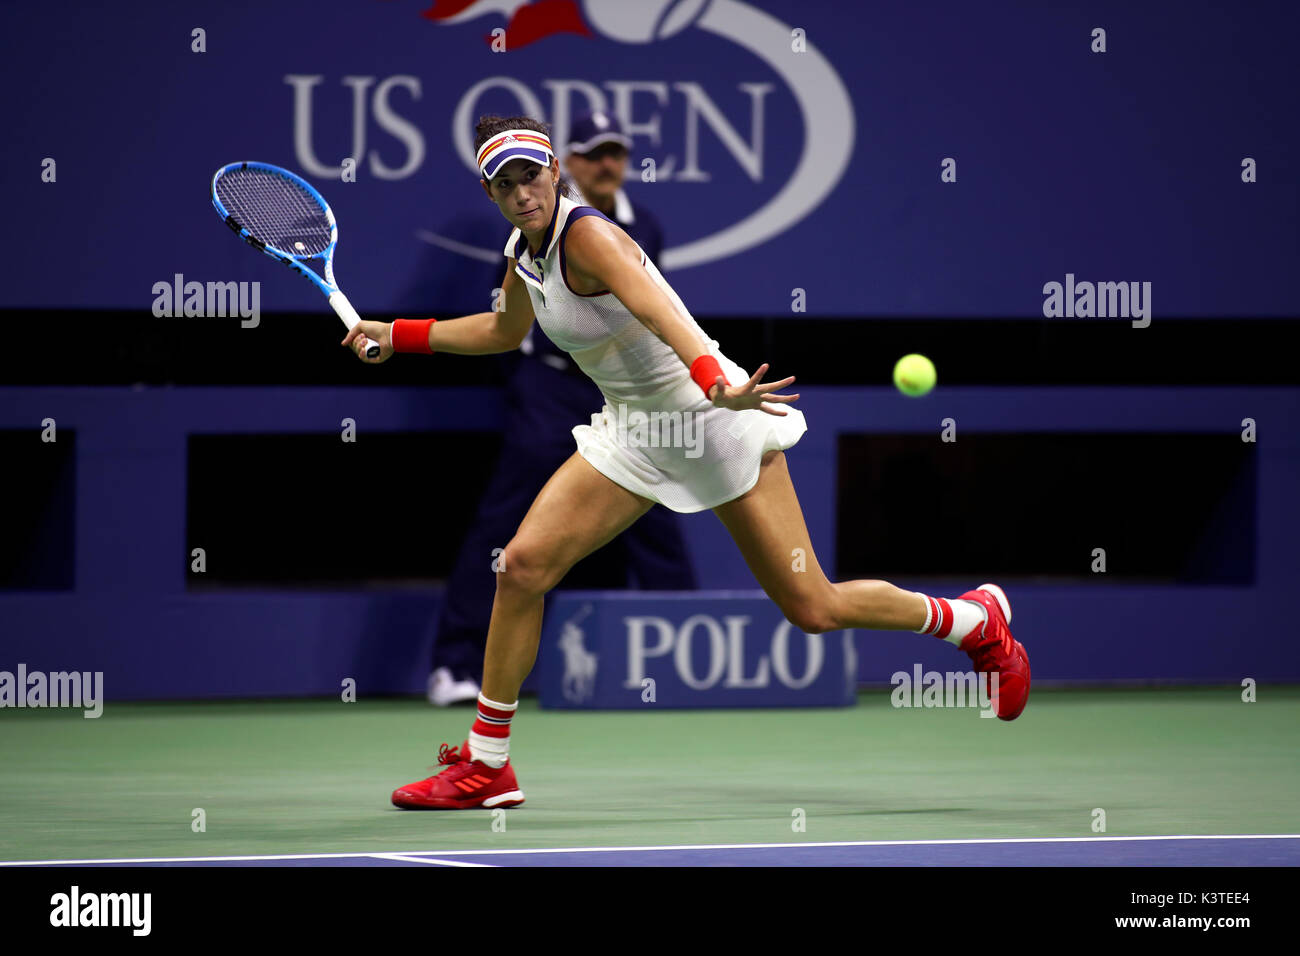 New York, USA. 03rd Sep, 2017. New York, United States. 03rd Sep, 2017. US Open Tennis: New York, 3 September, 2017 - # 3 seed Garabine Muguruza of Spain lines up a forehand return during her fourth round match against # 13 seed Petra Kivitova of the Czech Republic at the US Open in Flushing Meadows, New York. Kivitova won the match to earn a spot in the quarterfinals Credit: Adam Stoltman/Alamy Live News Credit: Adam Stoltman/Alamy Live News Stock Photo